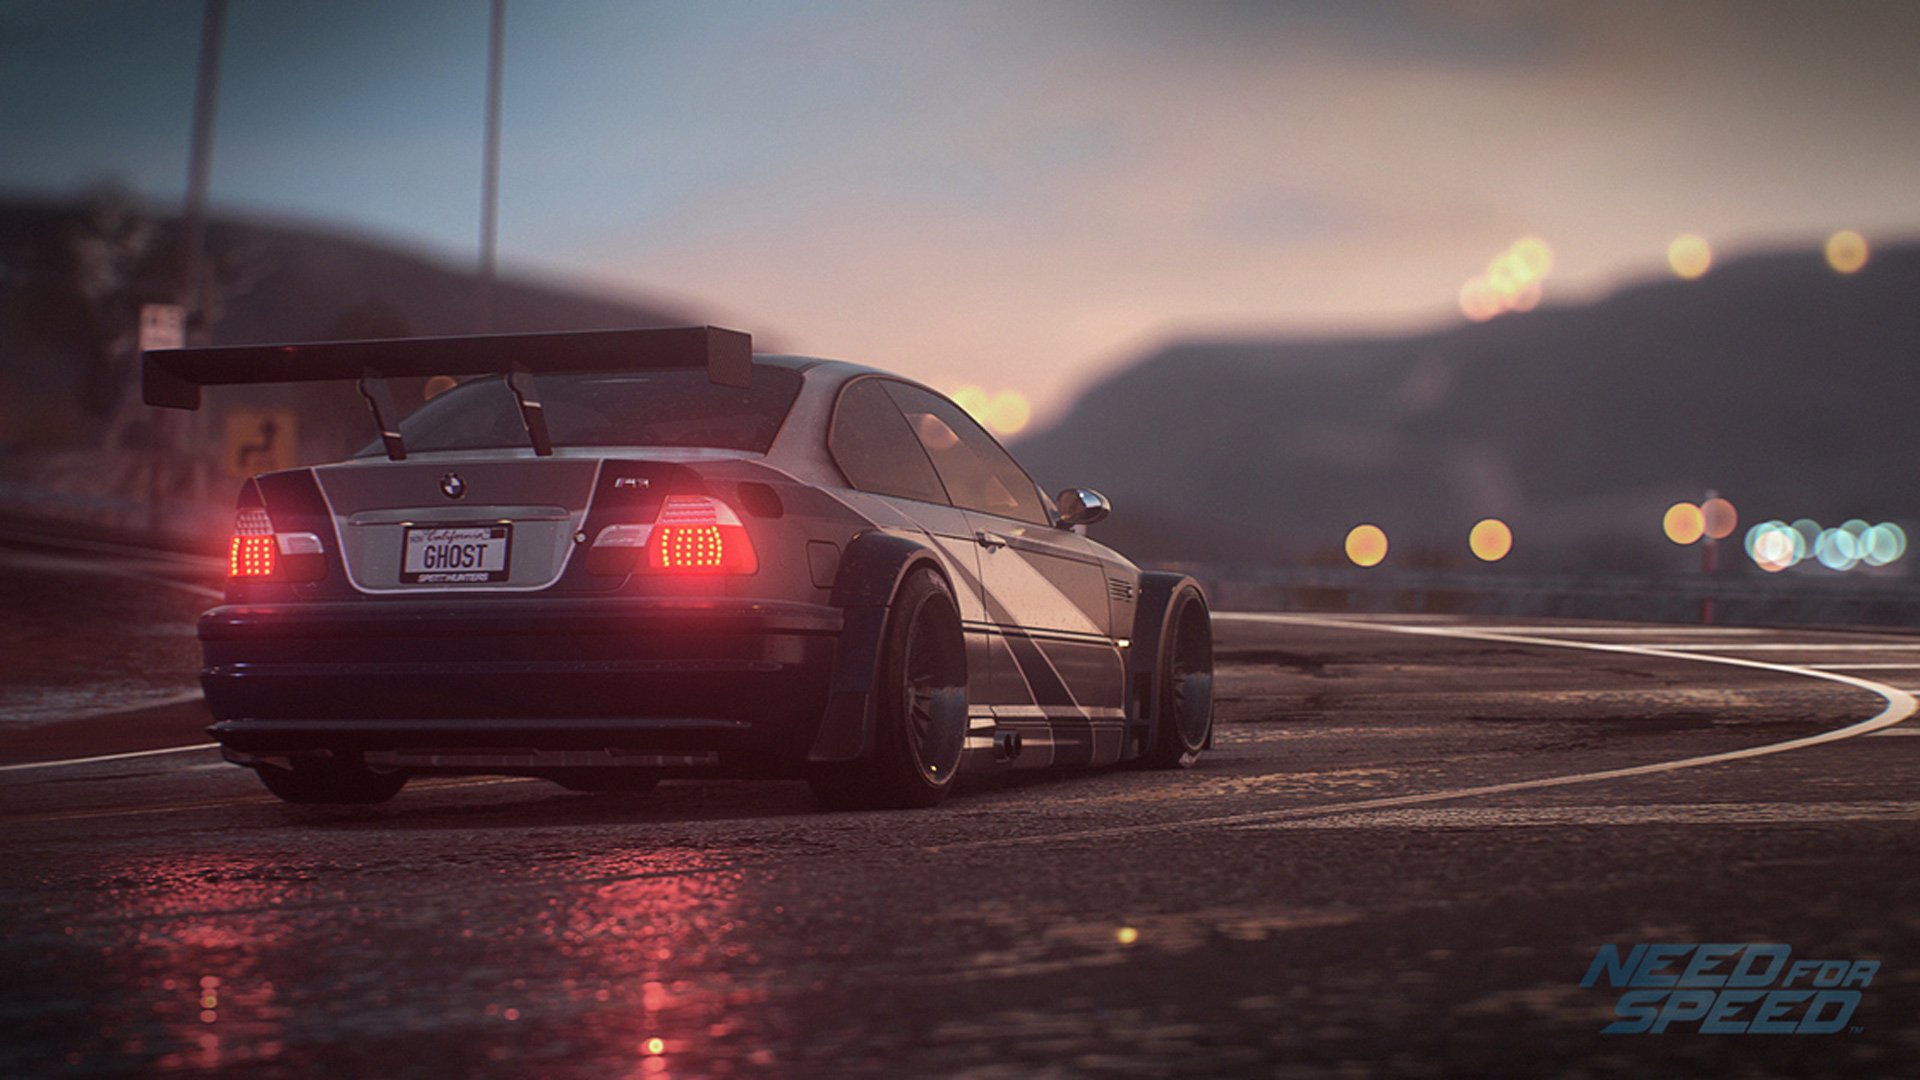 Need For Speed Bmw M3 Gtr - HD Wallpaper 